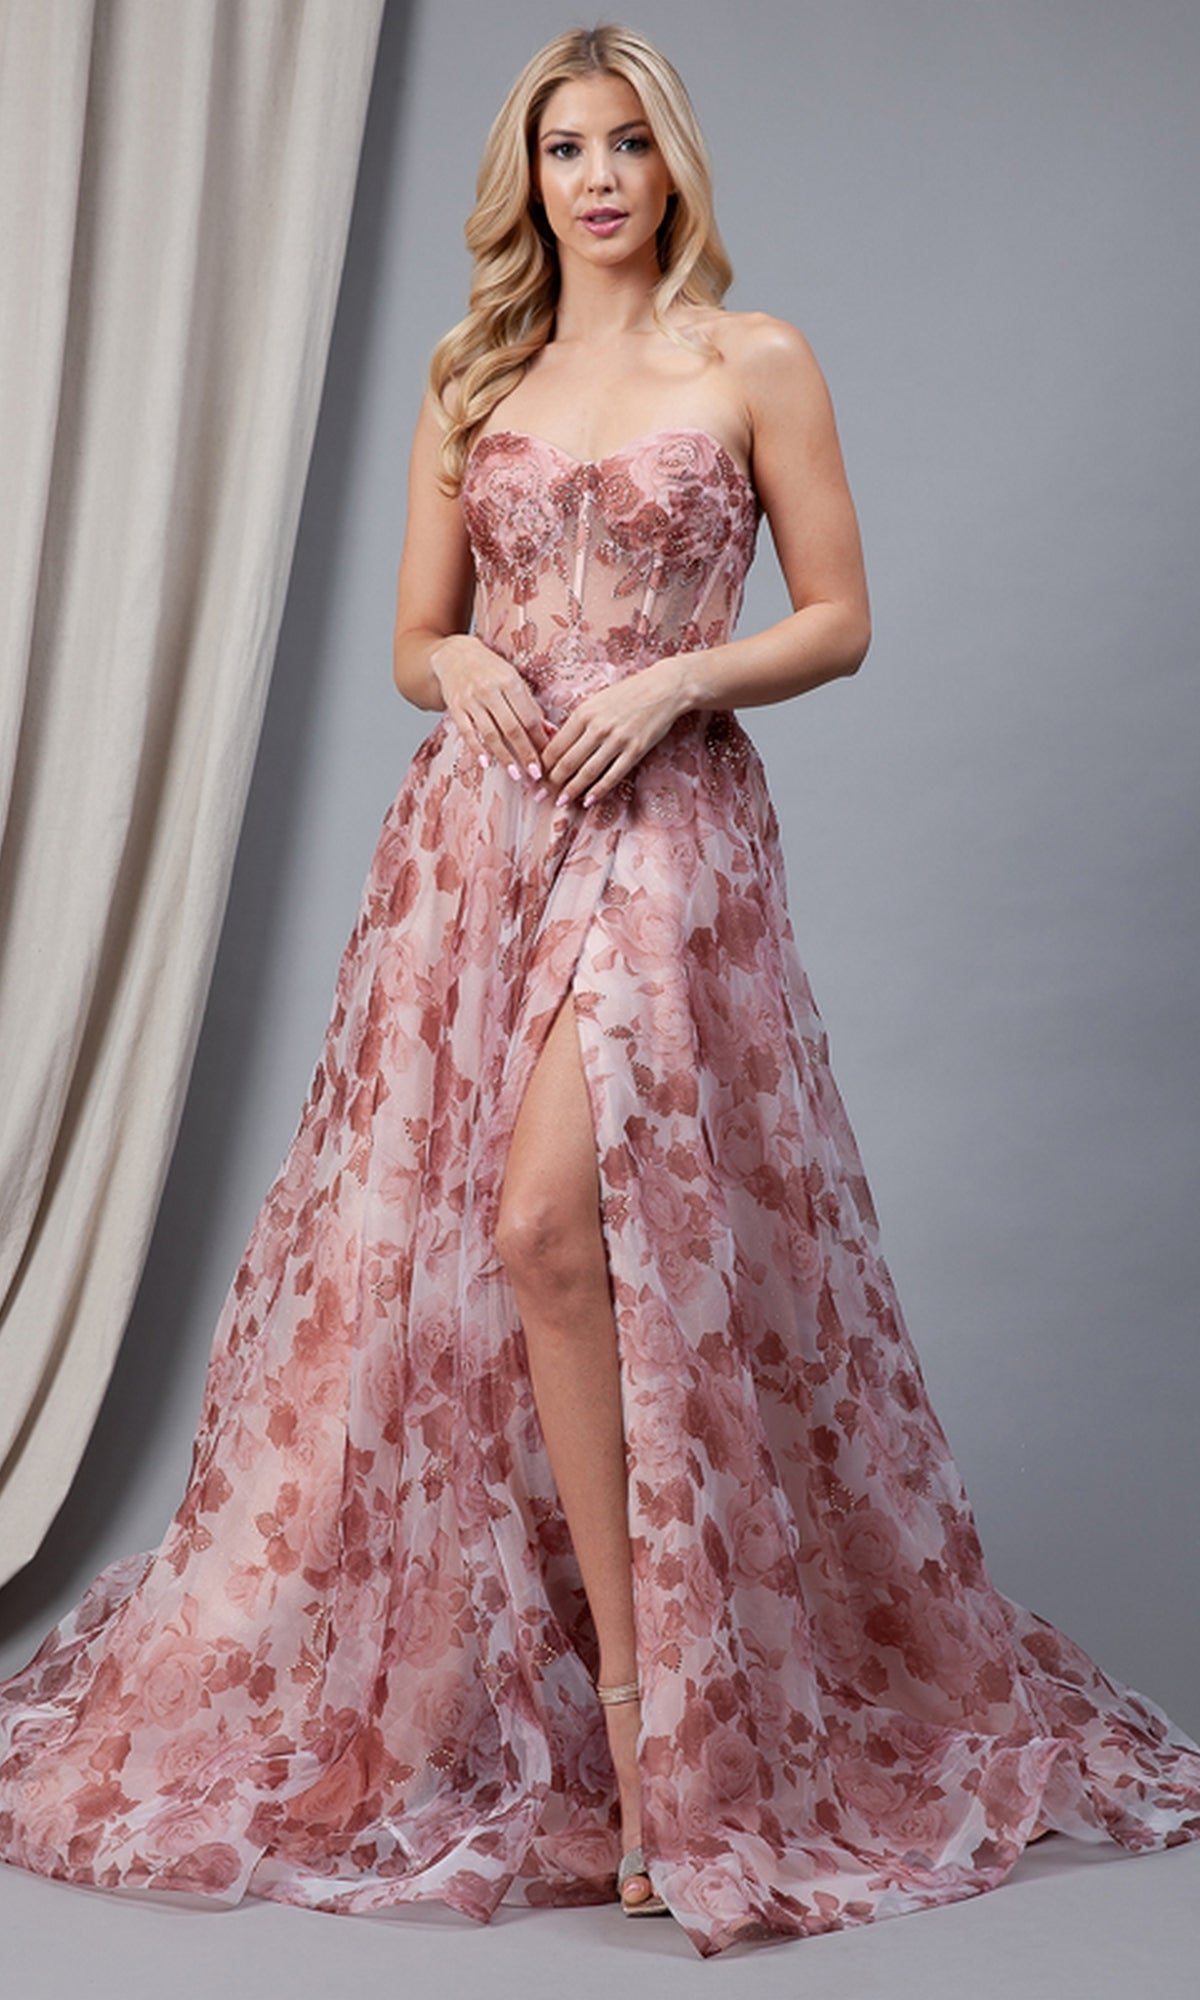 Sheer-Bodice Strapless Long Floral Prom Dress 2106